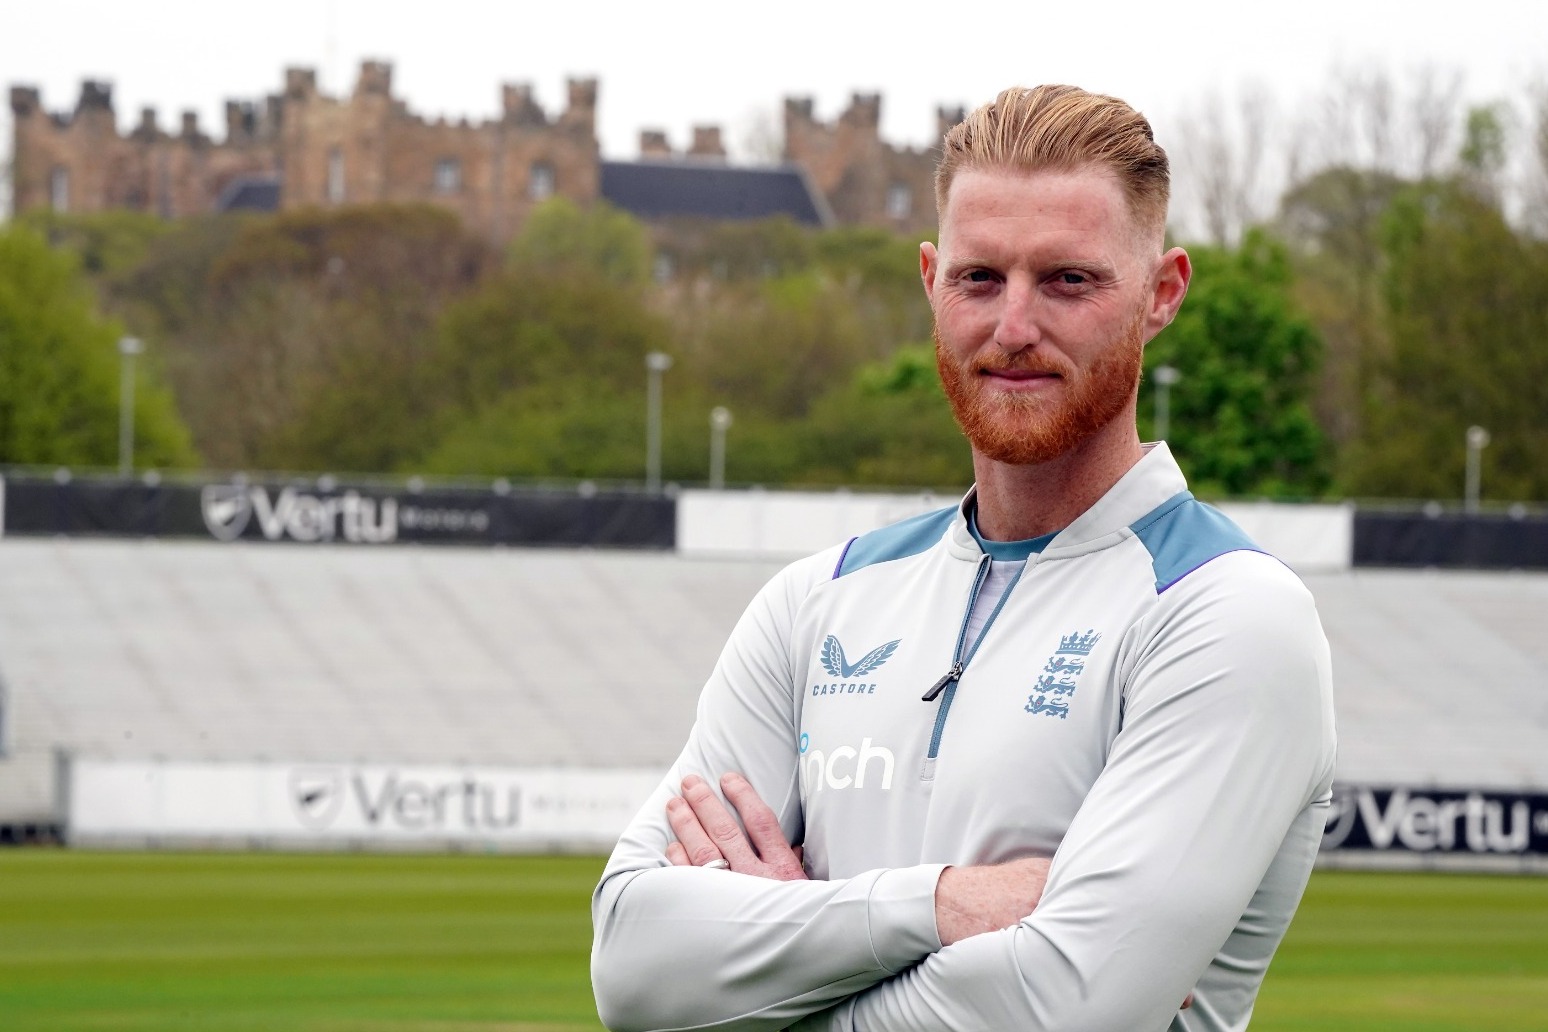 Ben Stokes hopes England career ups and downs help him be Test captain success 